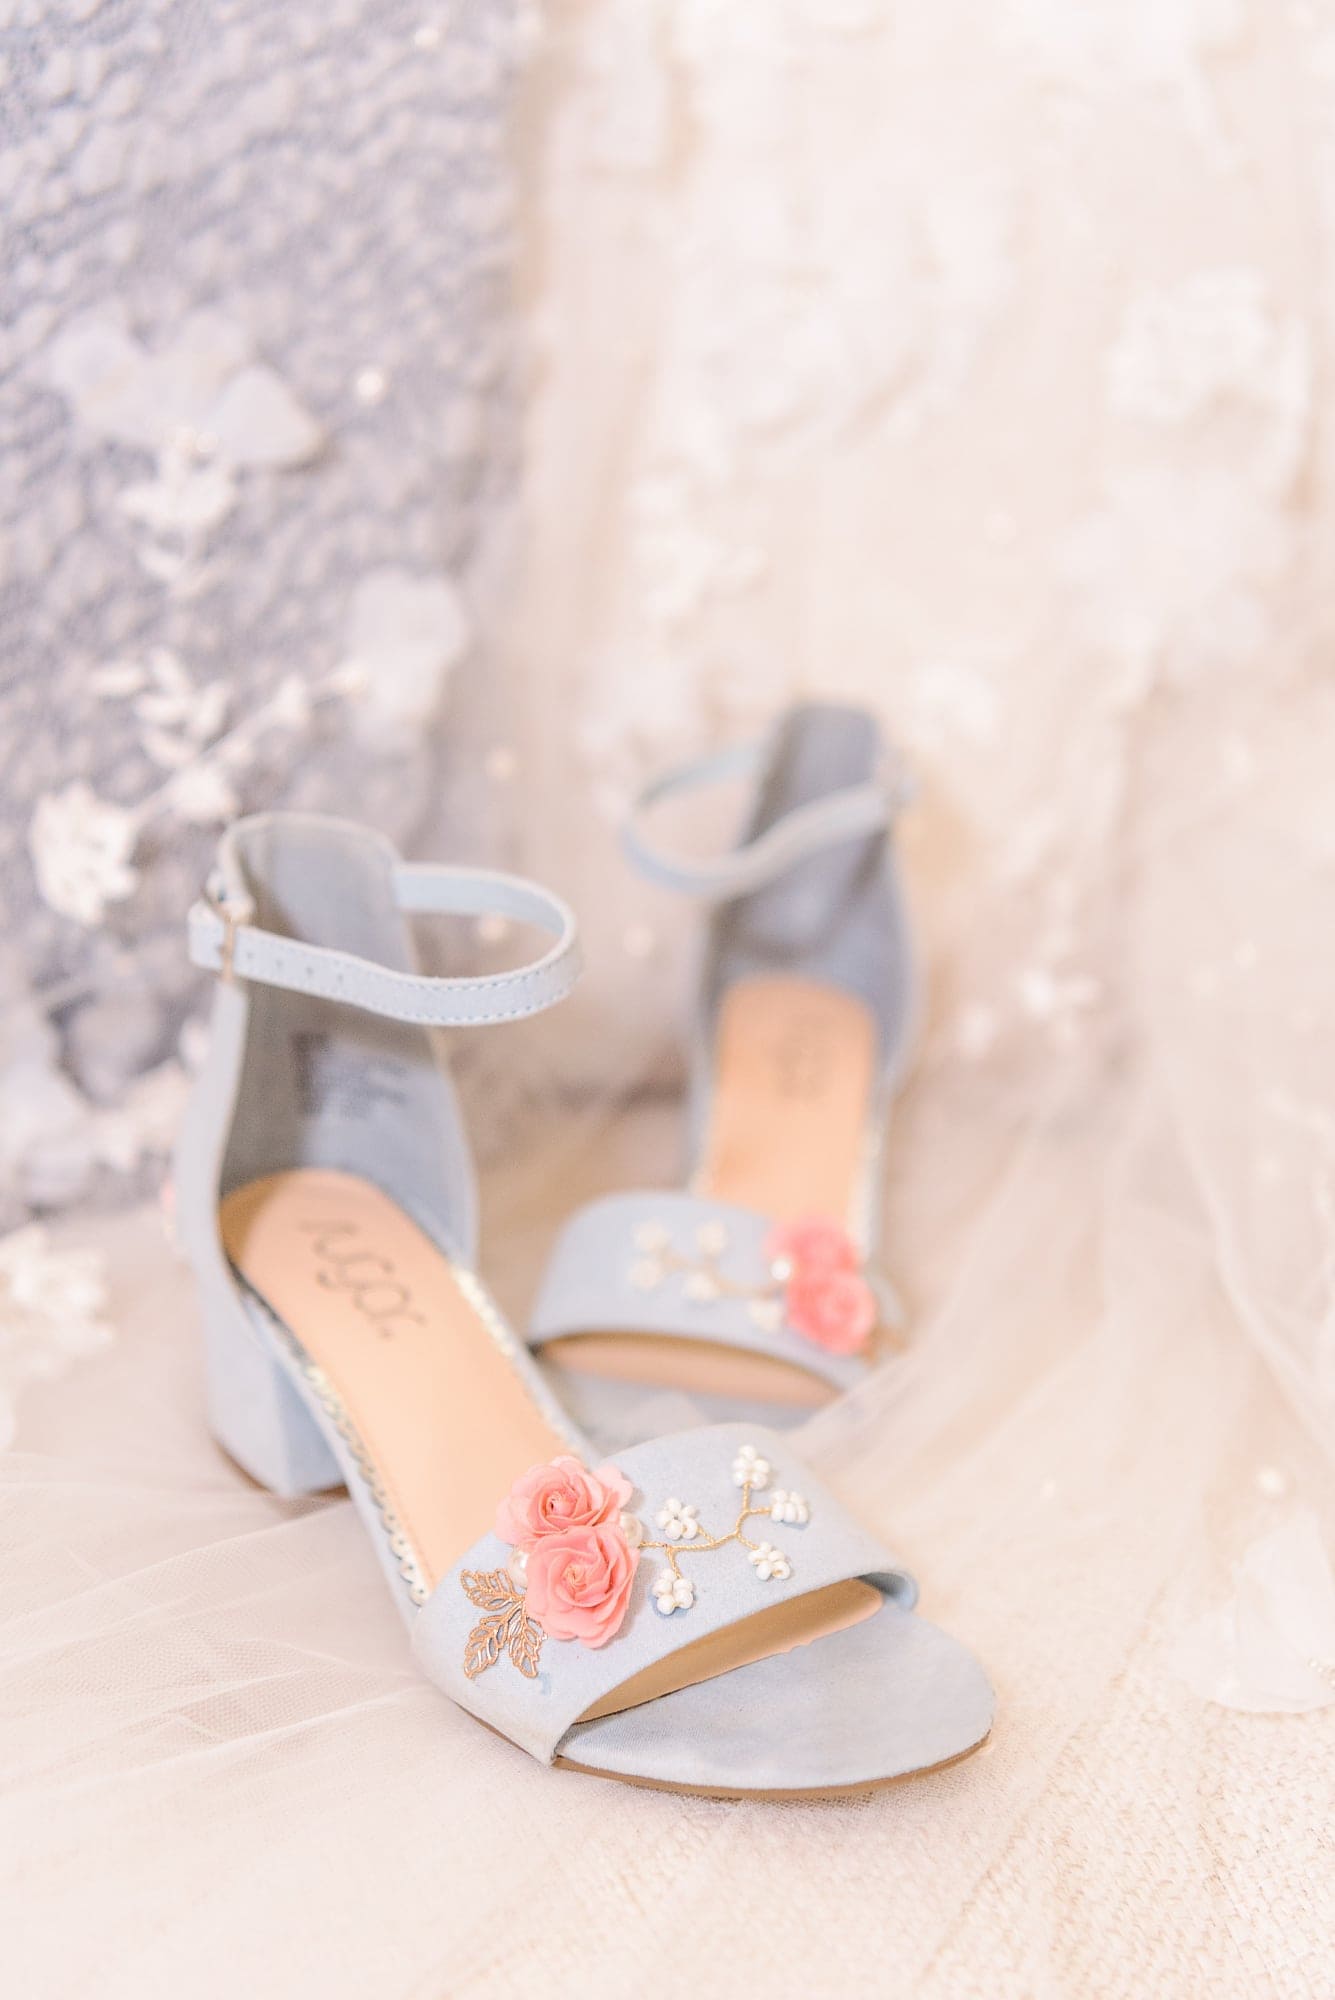 Blue wedding shoes the bride DIYed herself for her Delaney Ridge wedding.